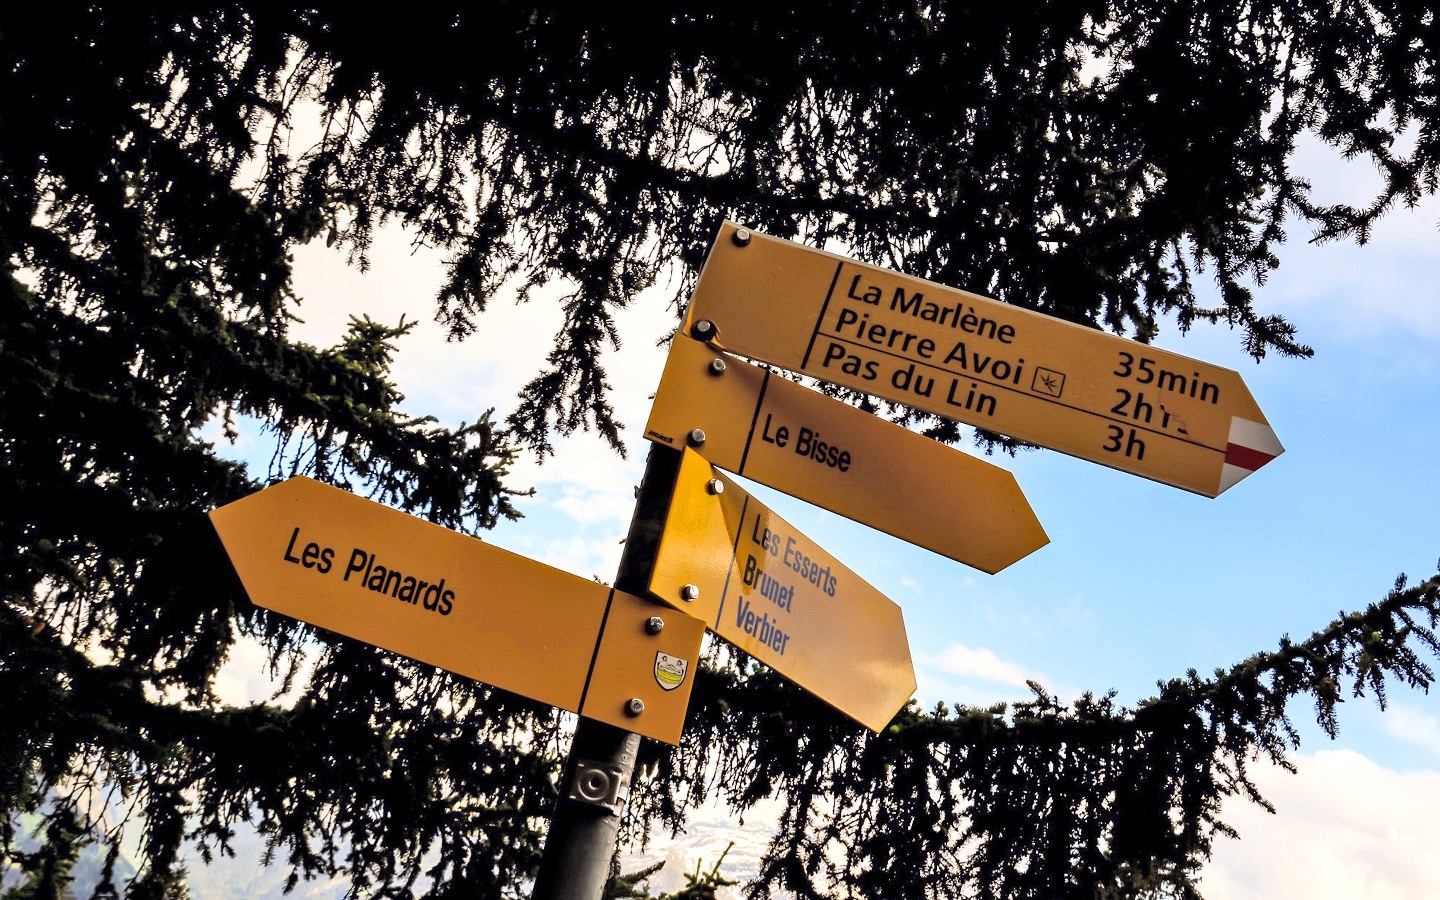 Signposts for hiking routes in Switzerland